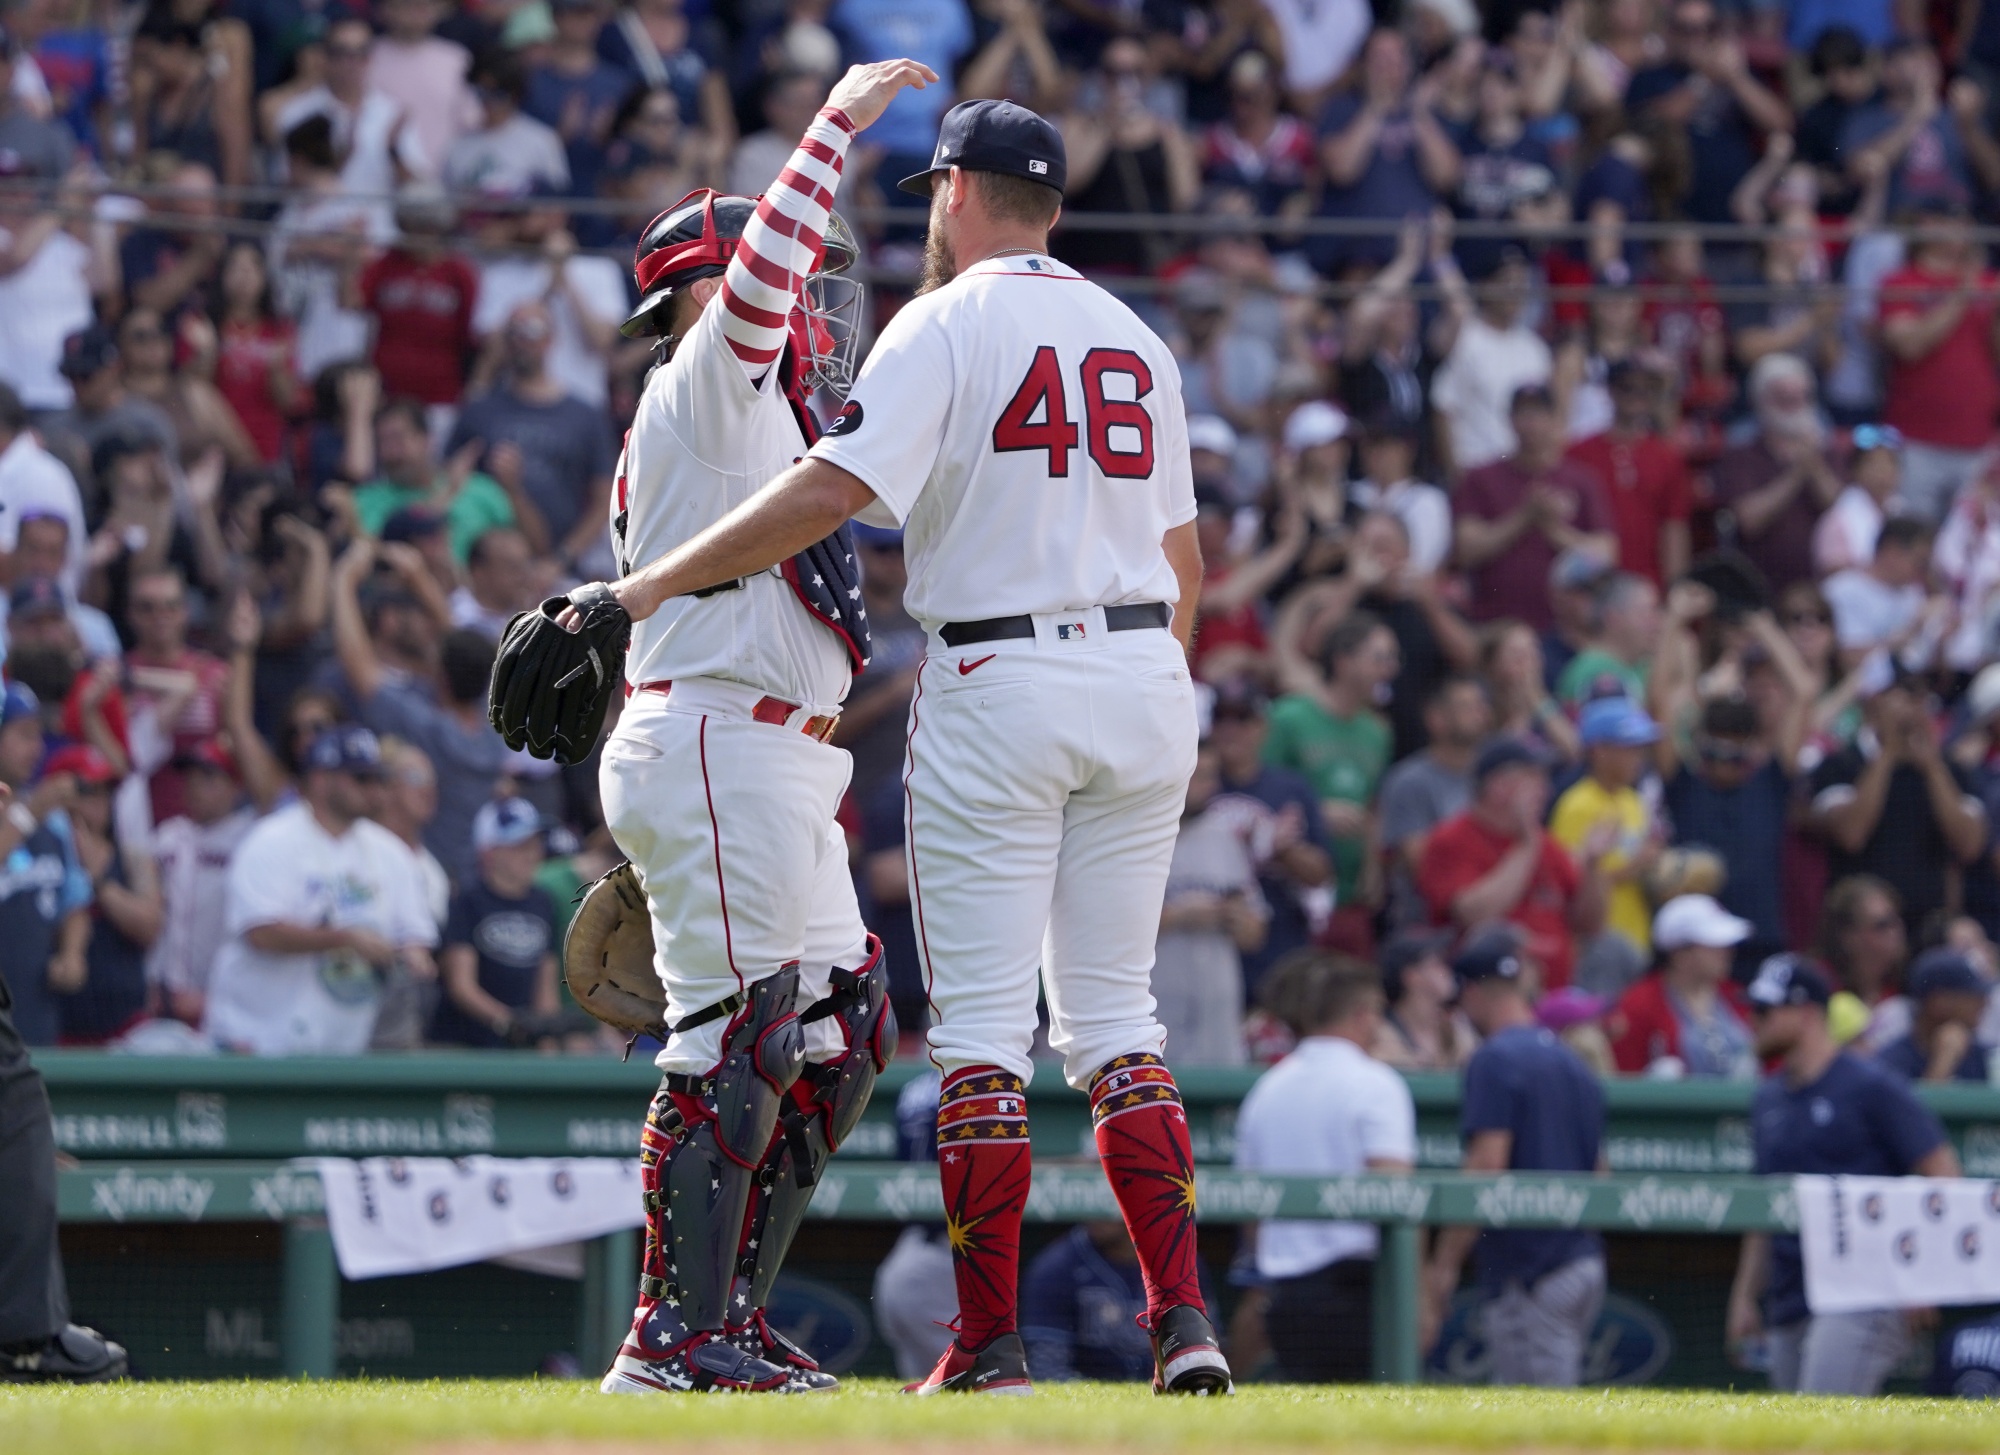 Know Your White Sox Enemy: Boston Red Sox - South Side Sox